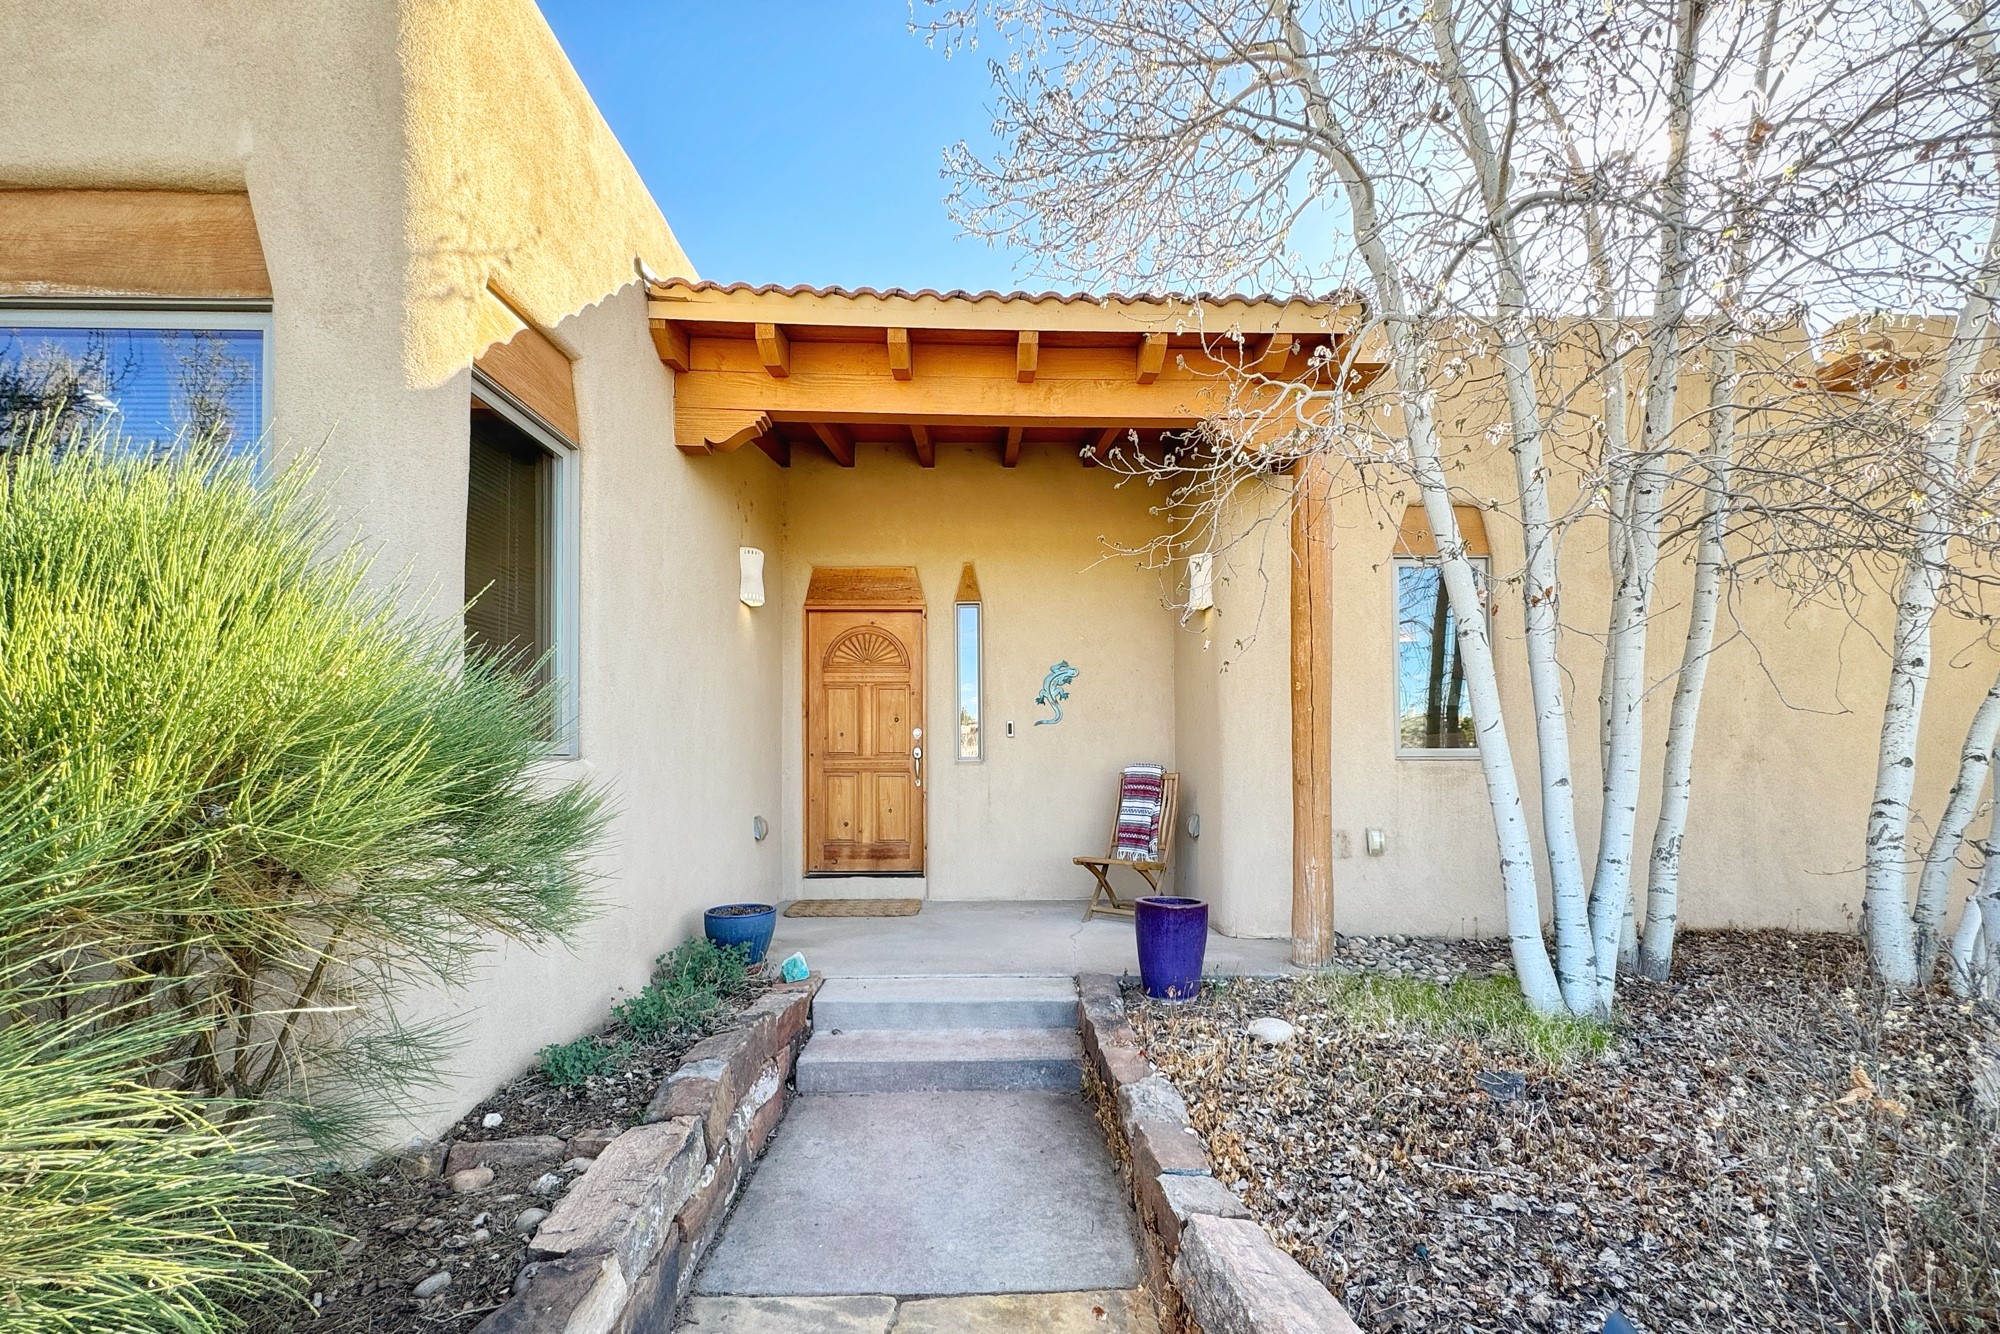 3028 Governor Lindsey, Santa Fe, New Mexico 87505, 4 Bedrooms Bedrooms, ,4 BathroomsBathrooms,Residential,For Sale,3028 Governor Lindsey,202401270